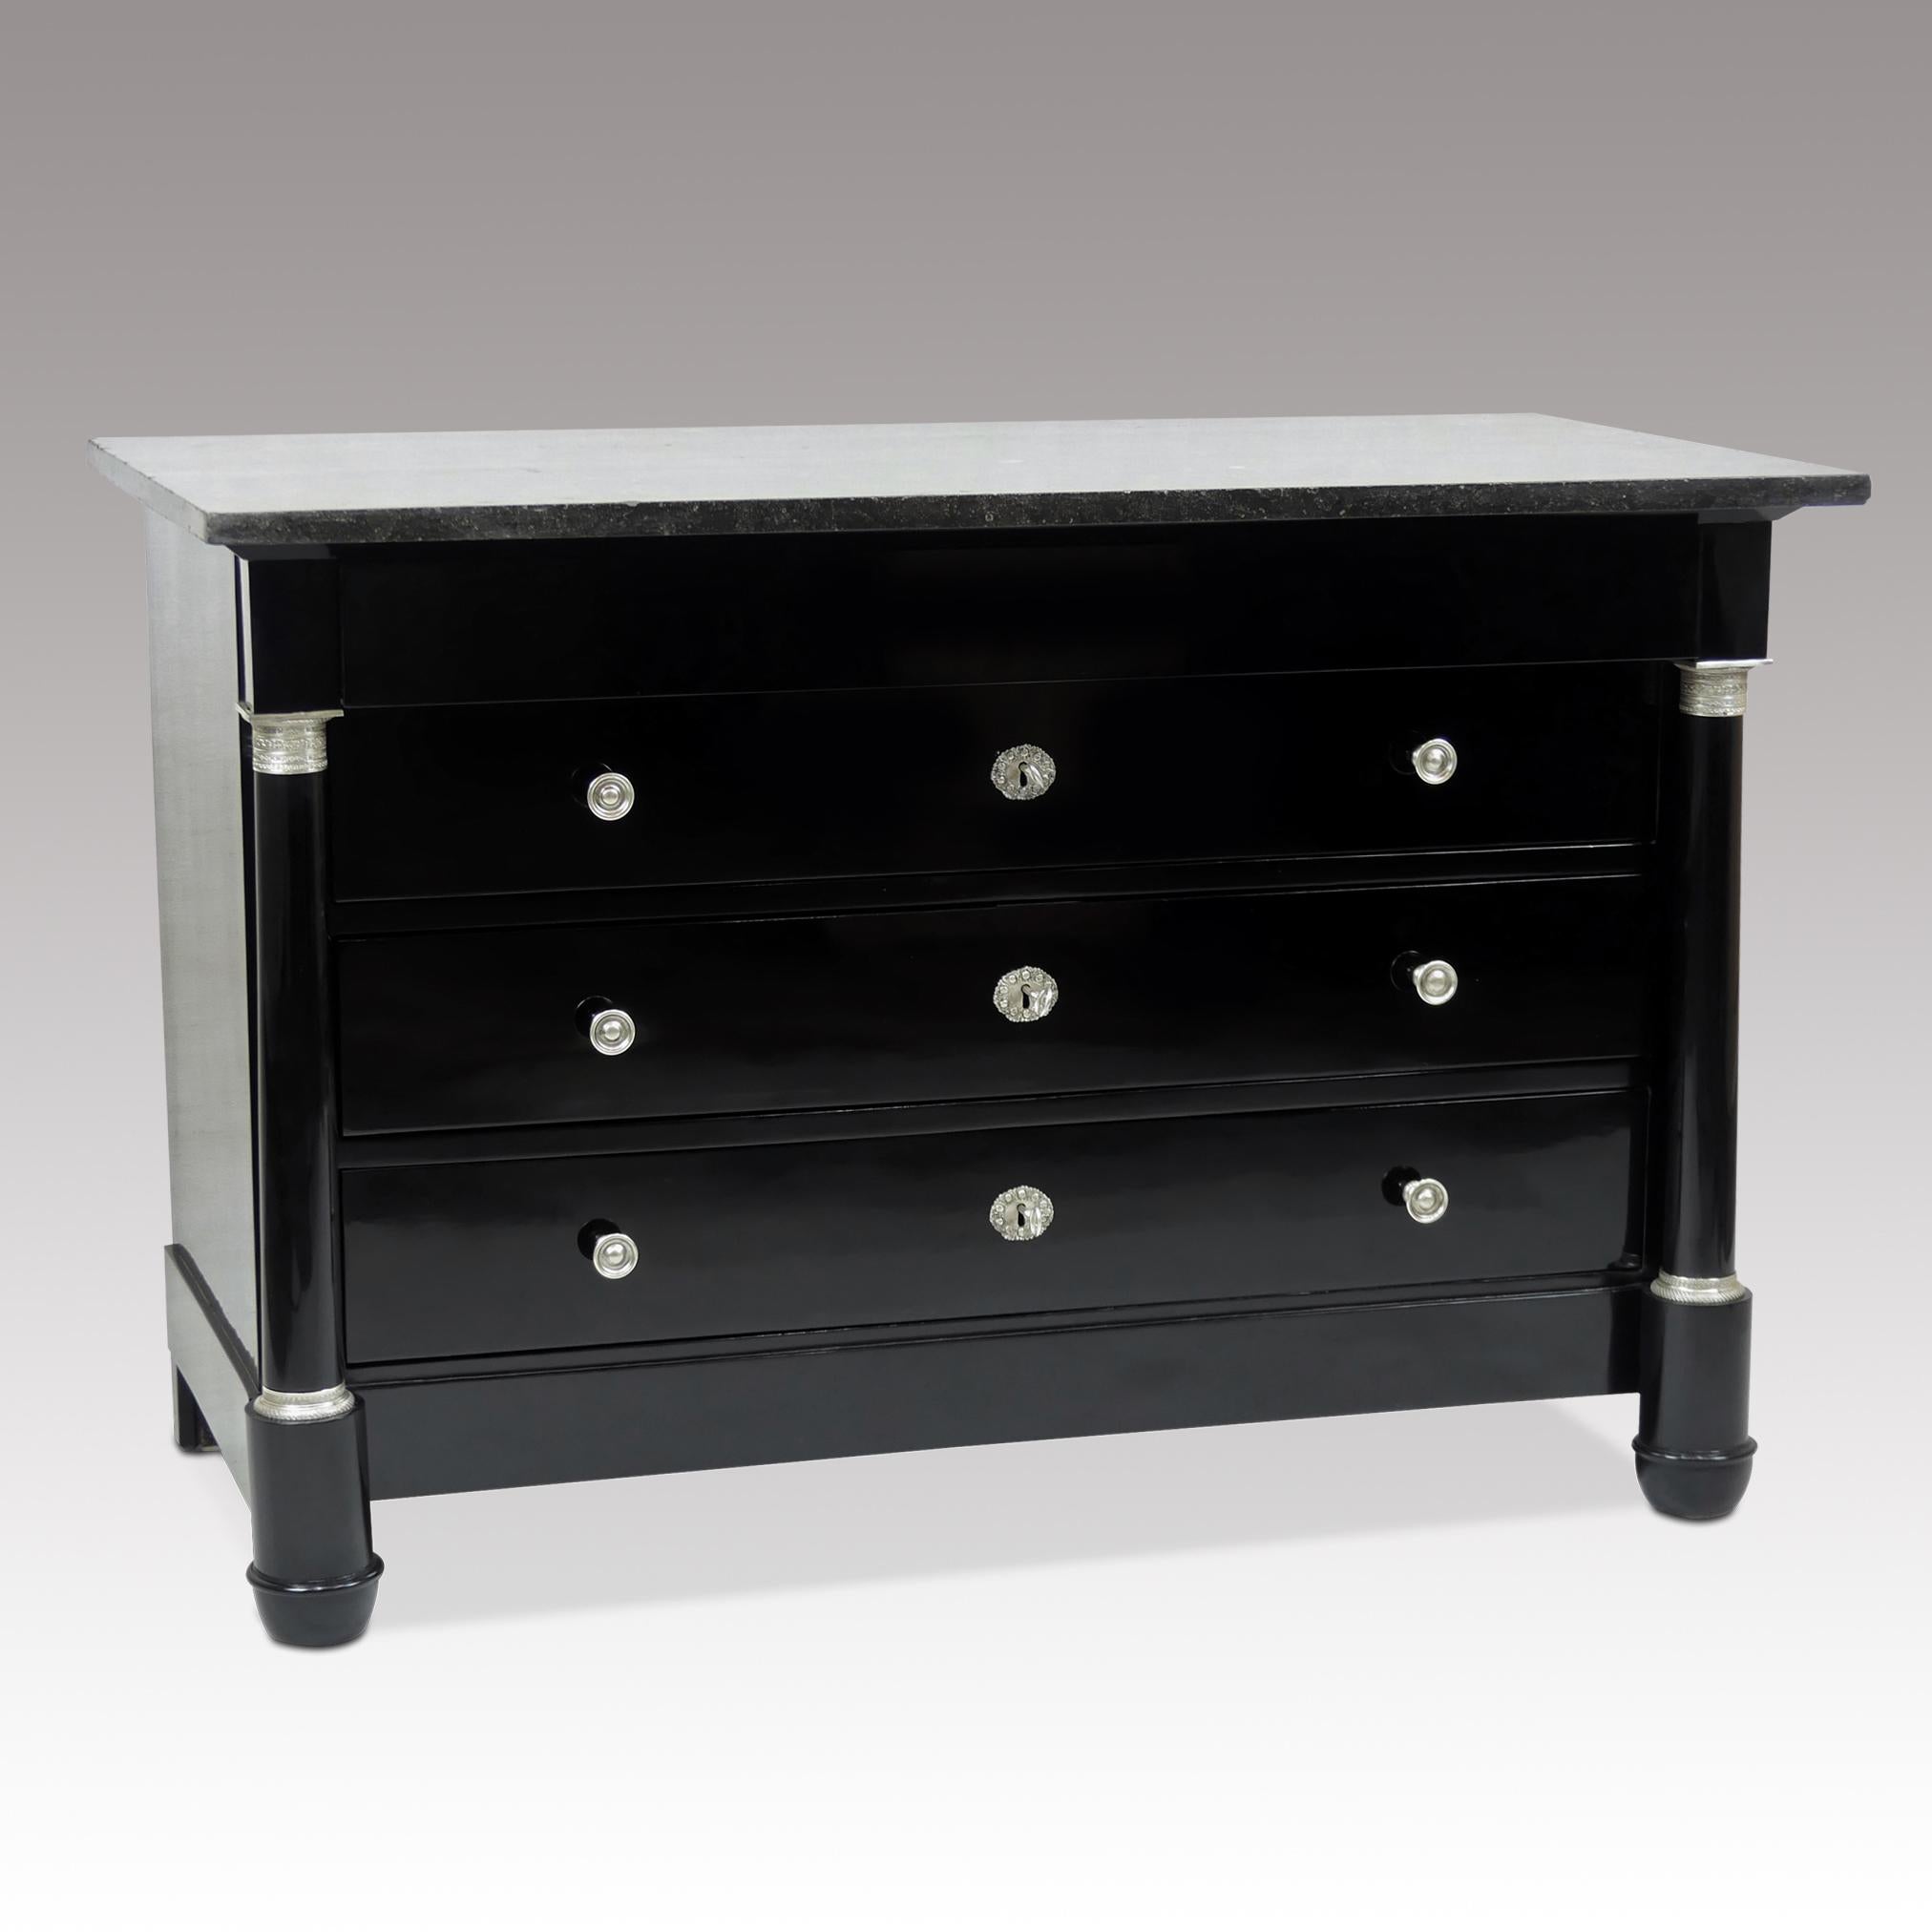 Antique ebonized Empire chest of drawers with silver-plated bronze fittings and original black / gray marble top. The dresser has four drawers and two columns, one on each side. The columns above and below are decorated with very fine, chased,